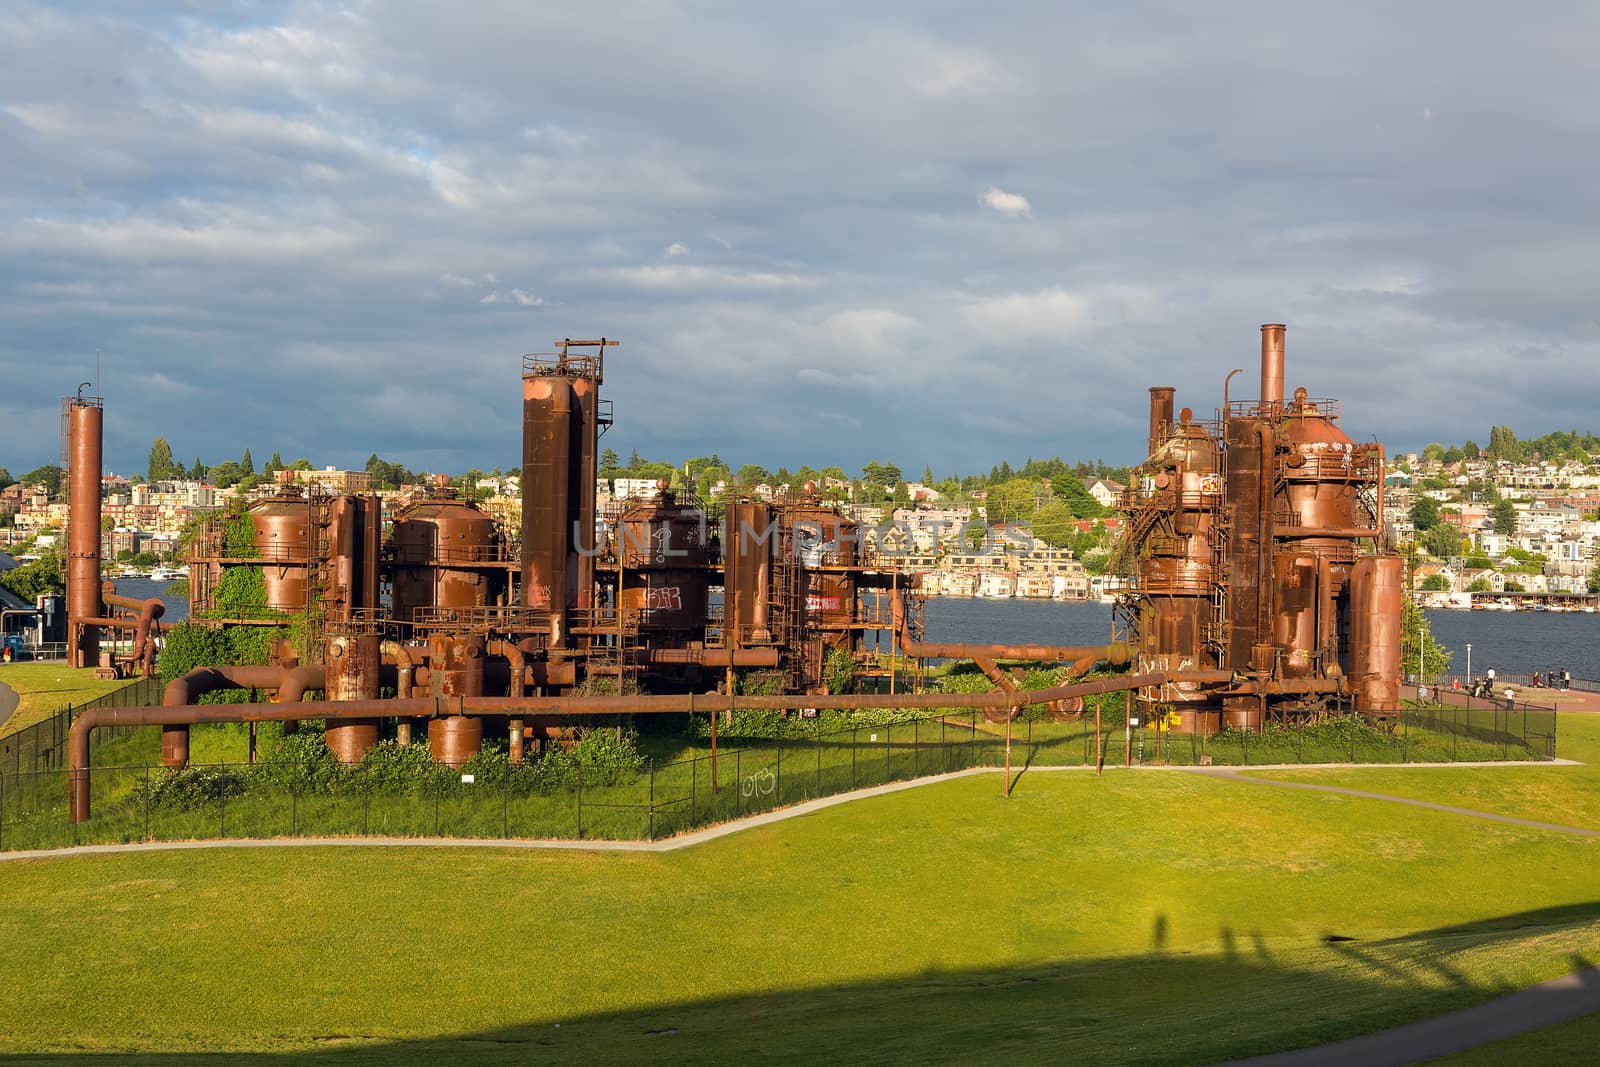 Gas Works Park by Lake Union in Seattle Washington